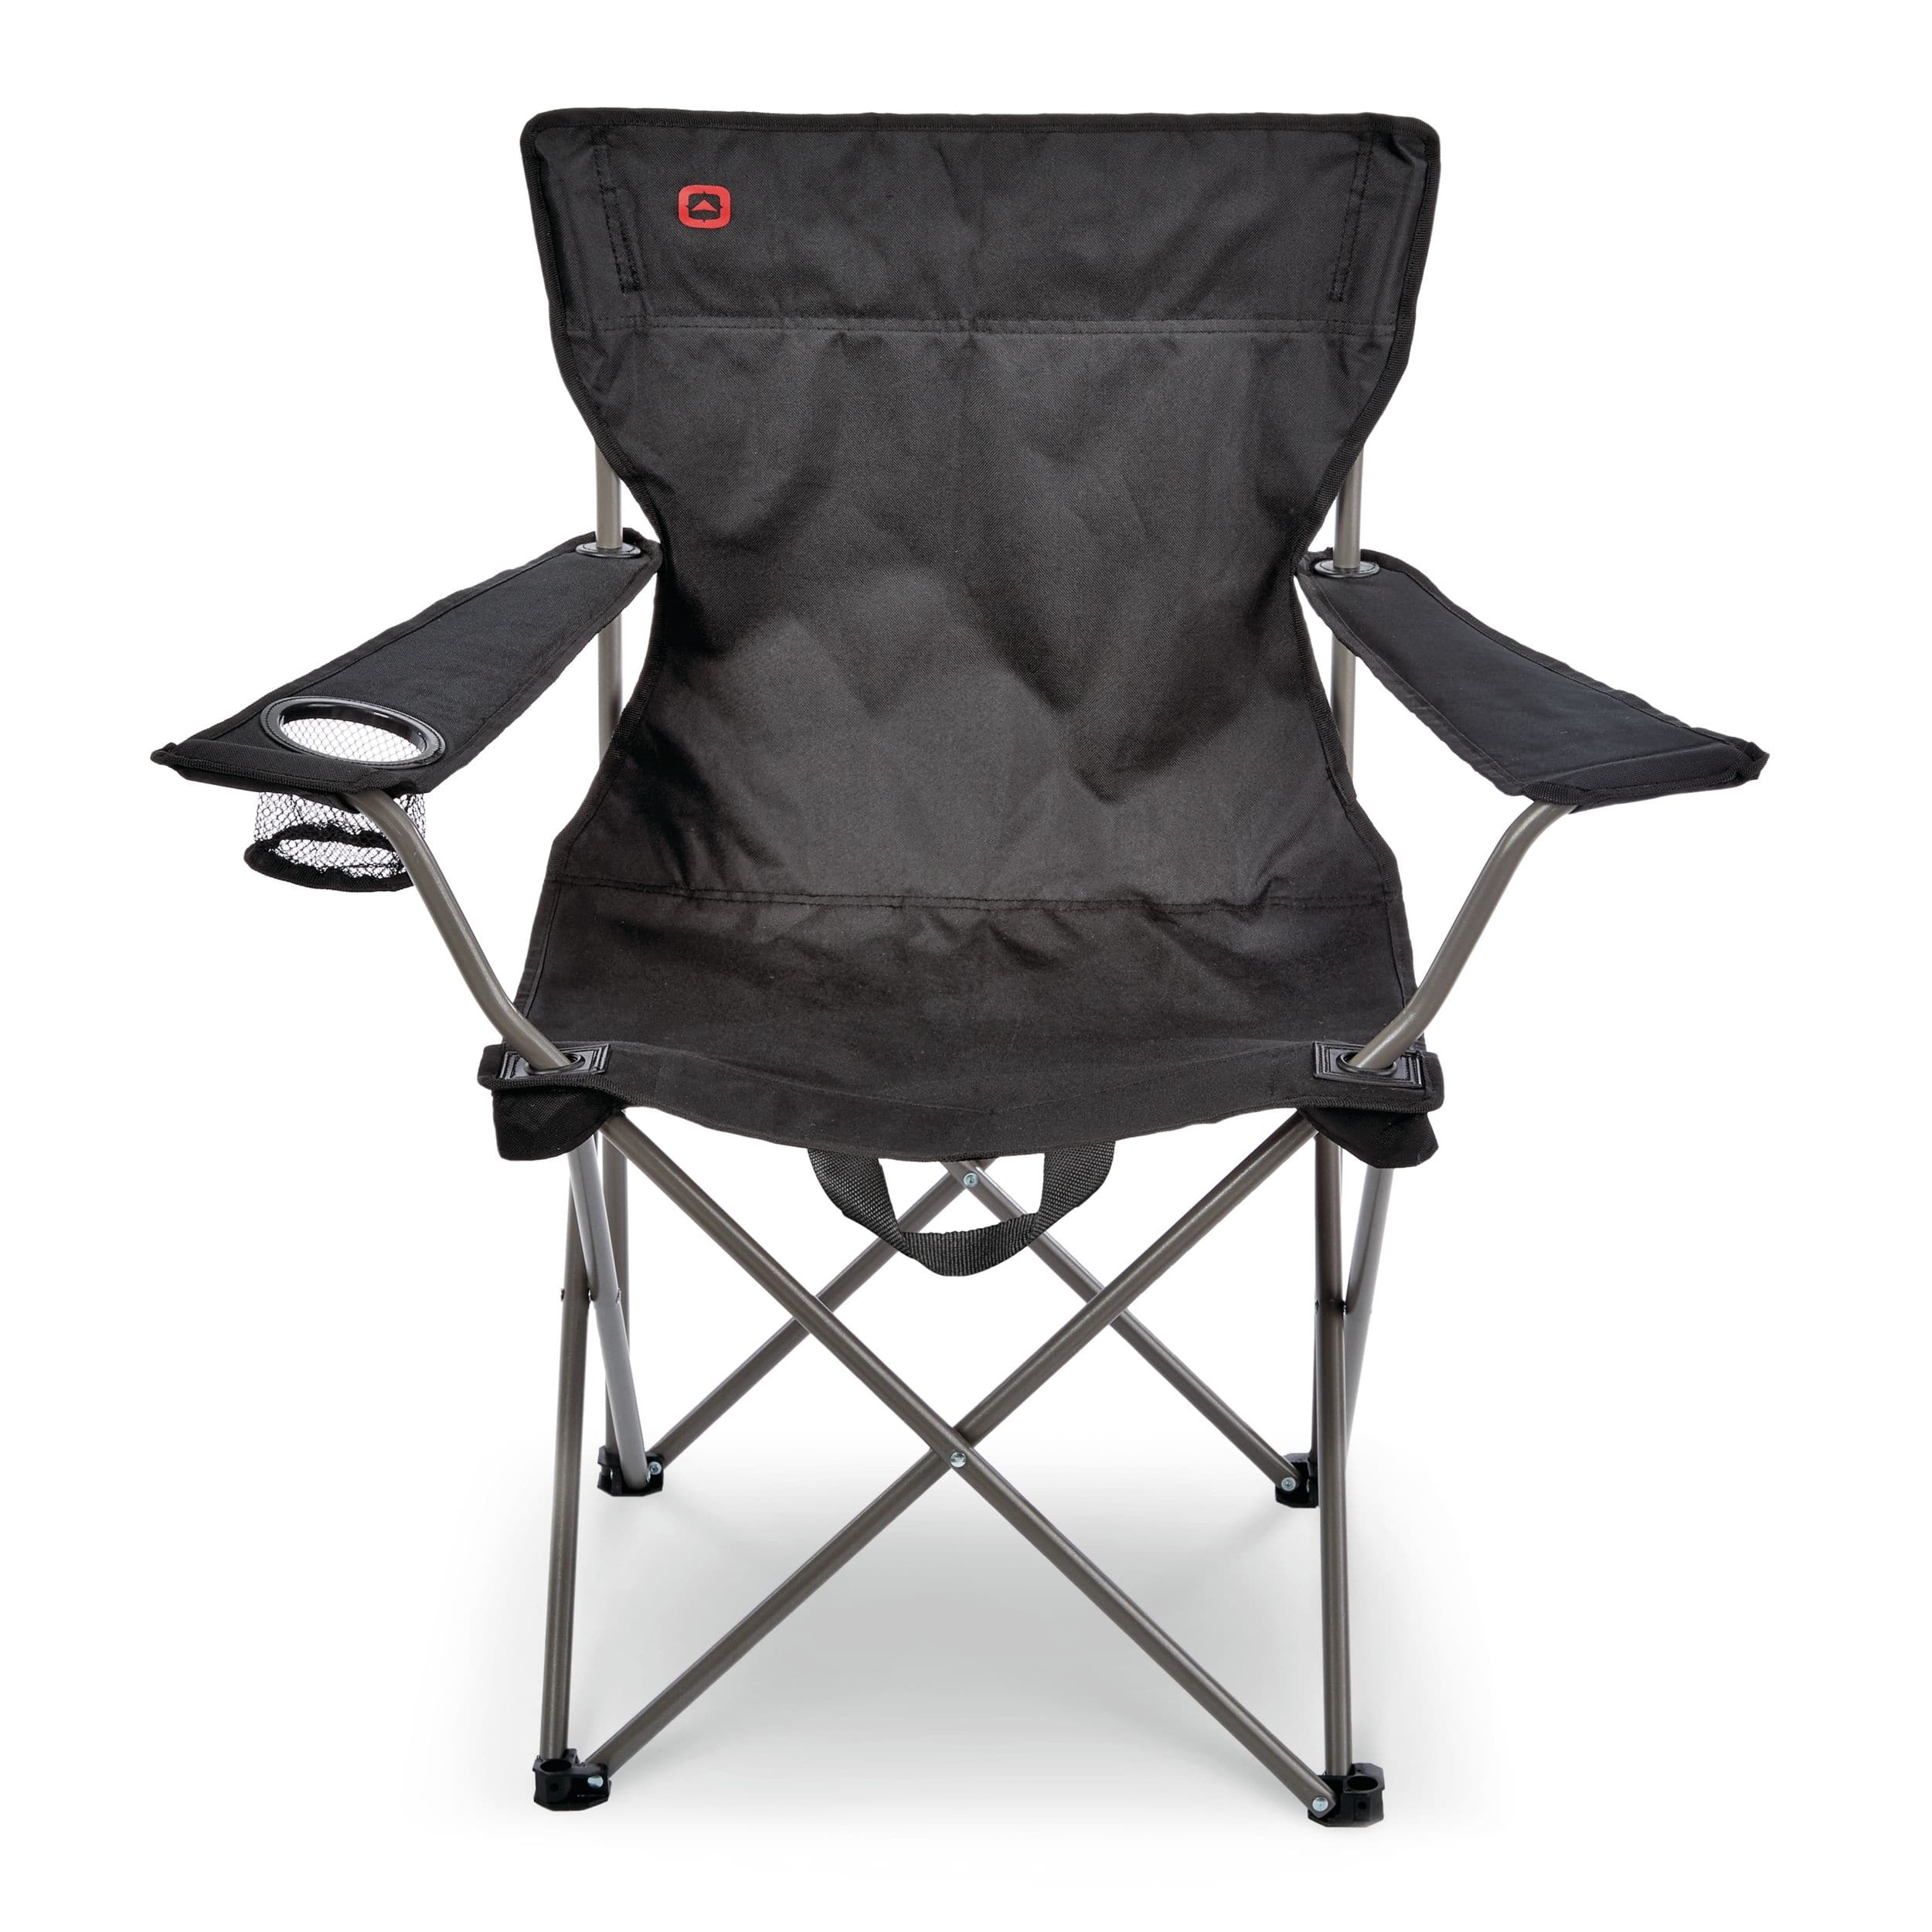 Outbound Wide Back Folding Camping Quad Chair w/ Cup Holder